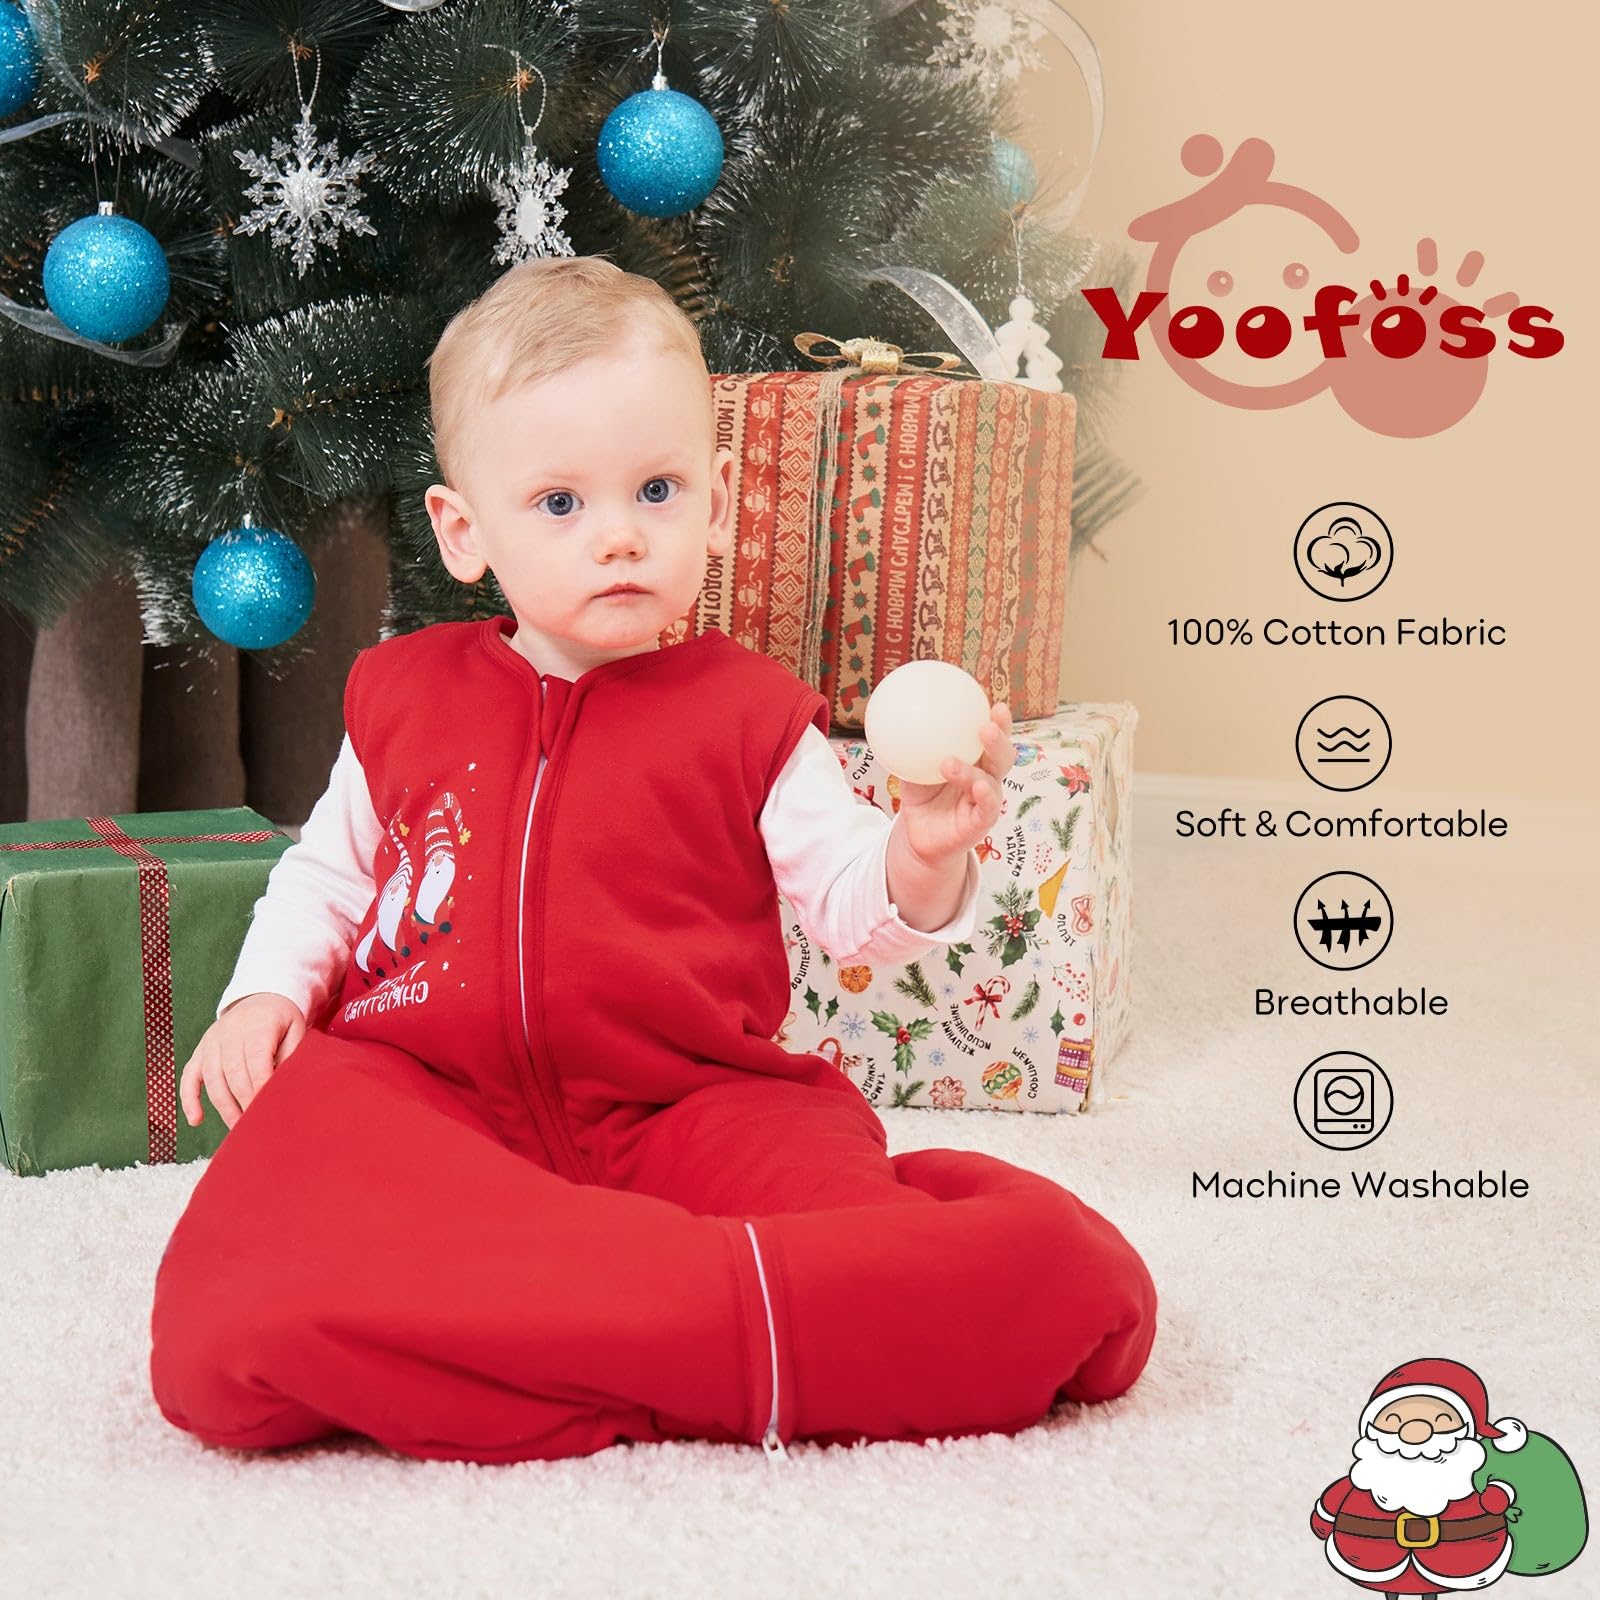 Yoofoss Baby Christams Sleep Sack, Winter TOG 2.5 Wearable Blanket for Baby with 2-Way Zipper, 100% Cotton Fabric